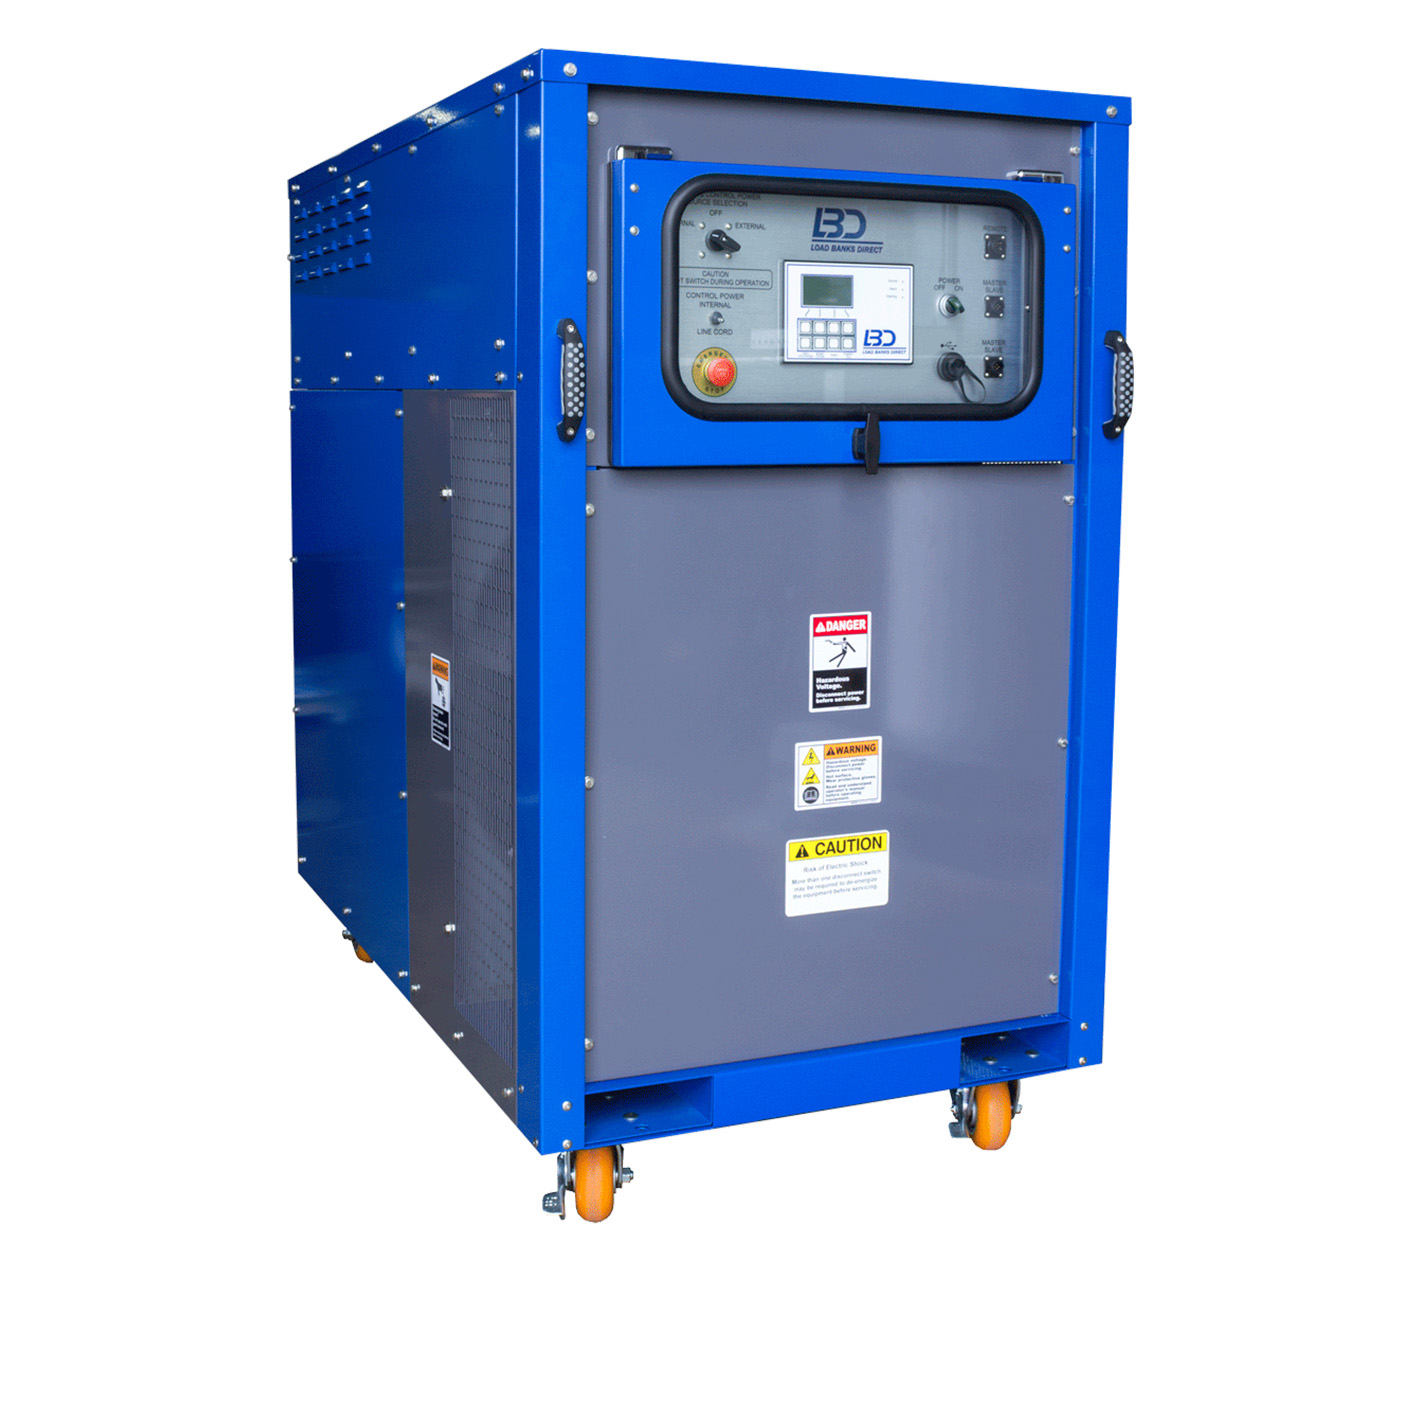 Rentaload - Our products - 7kW and 11kW rack load banks